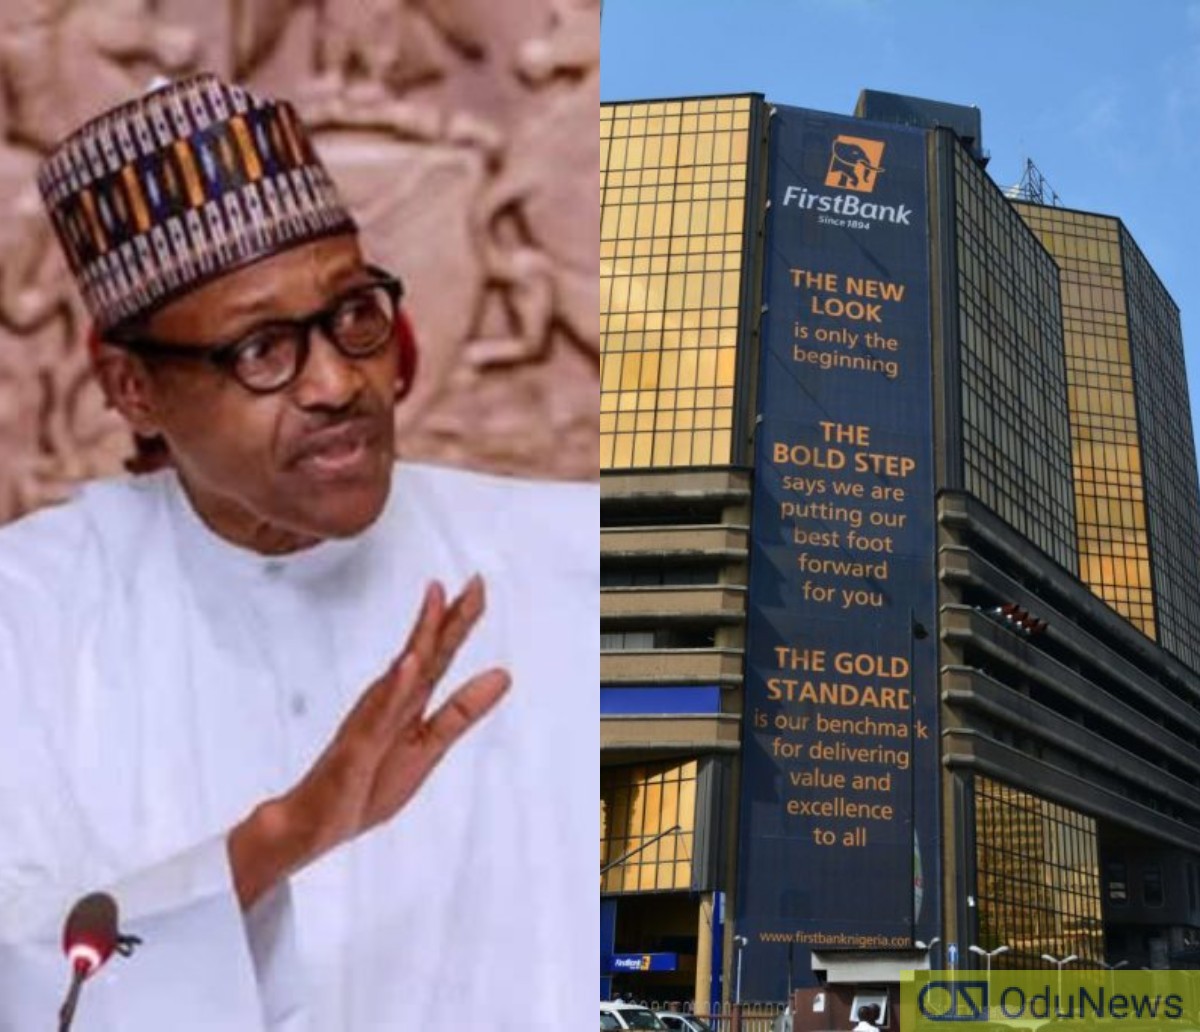 Buhari Hails First Bank For 40 Years Of Cross-Border Banking In UK  